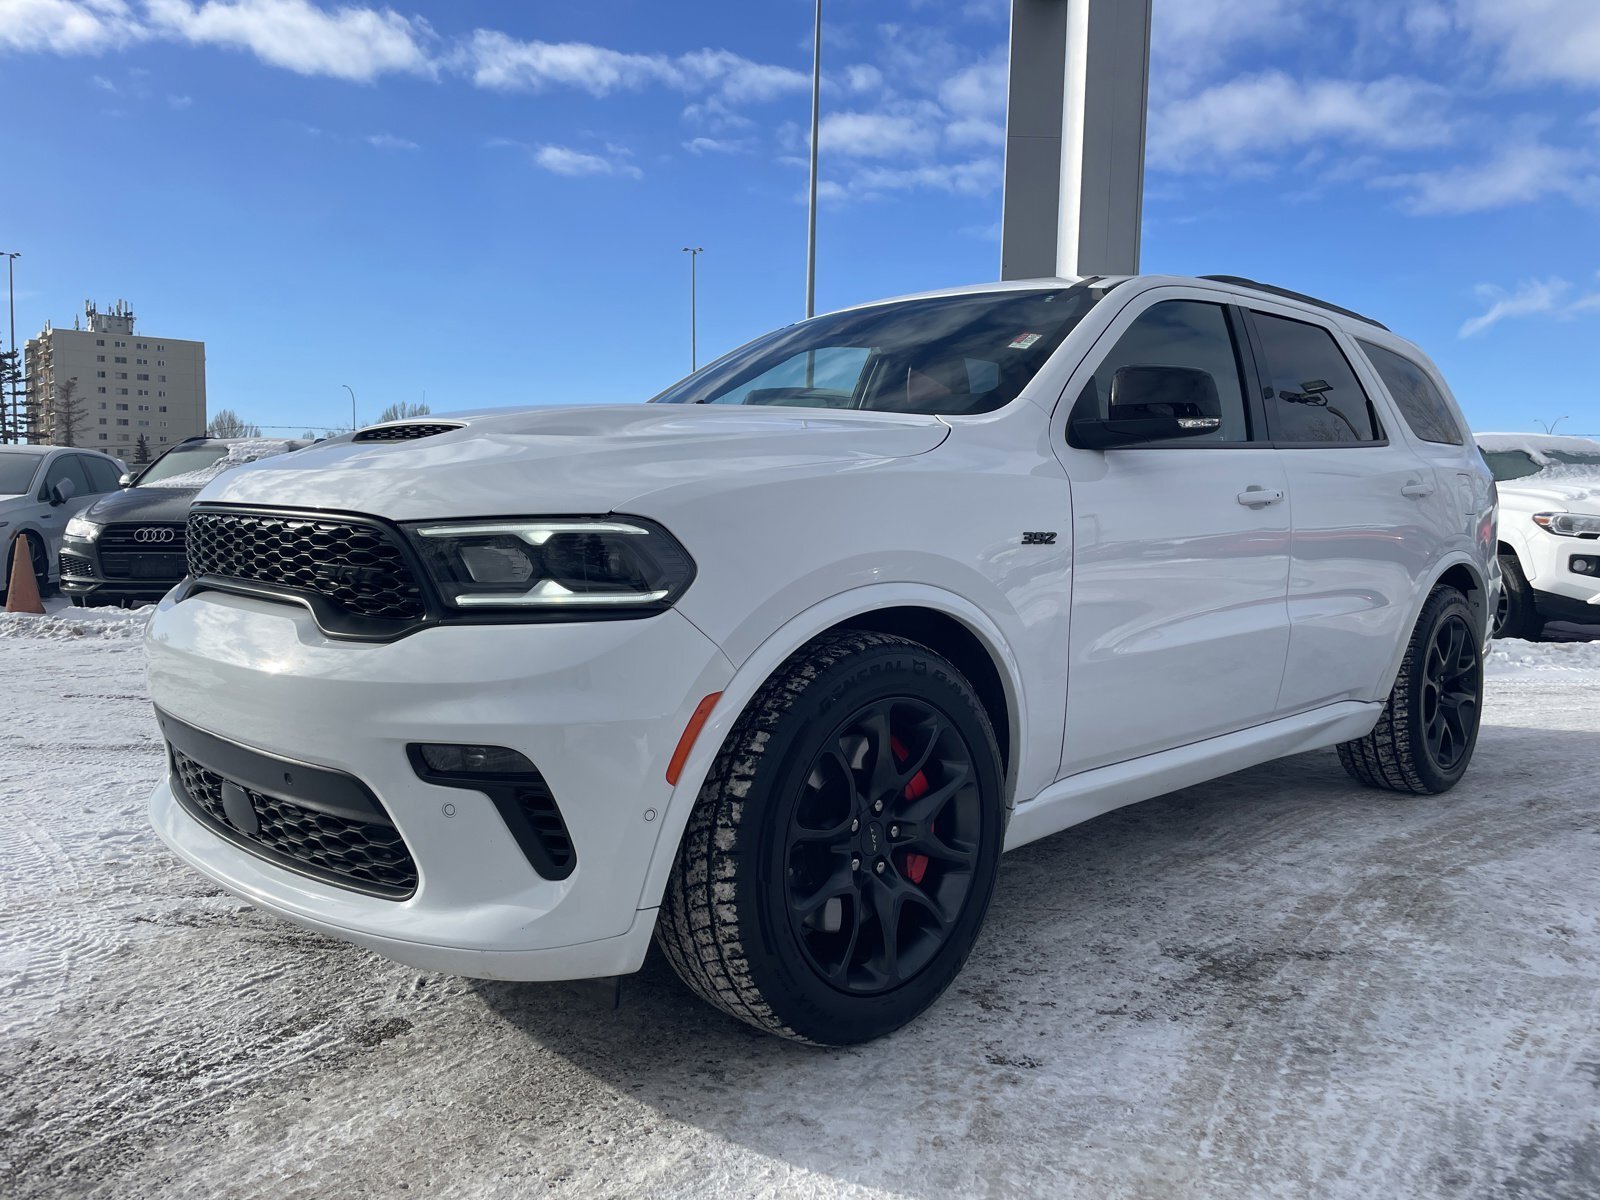 2022 Dodge Durango SRT 392 | Clean Carfax | One Owner | Low KMs!